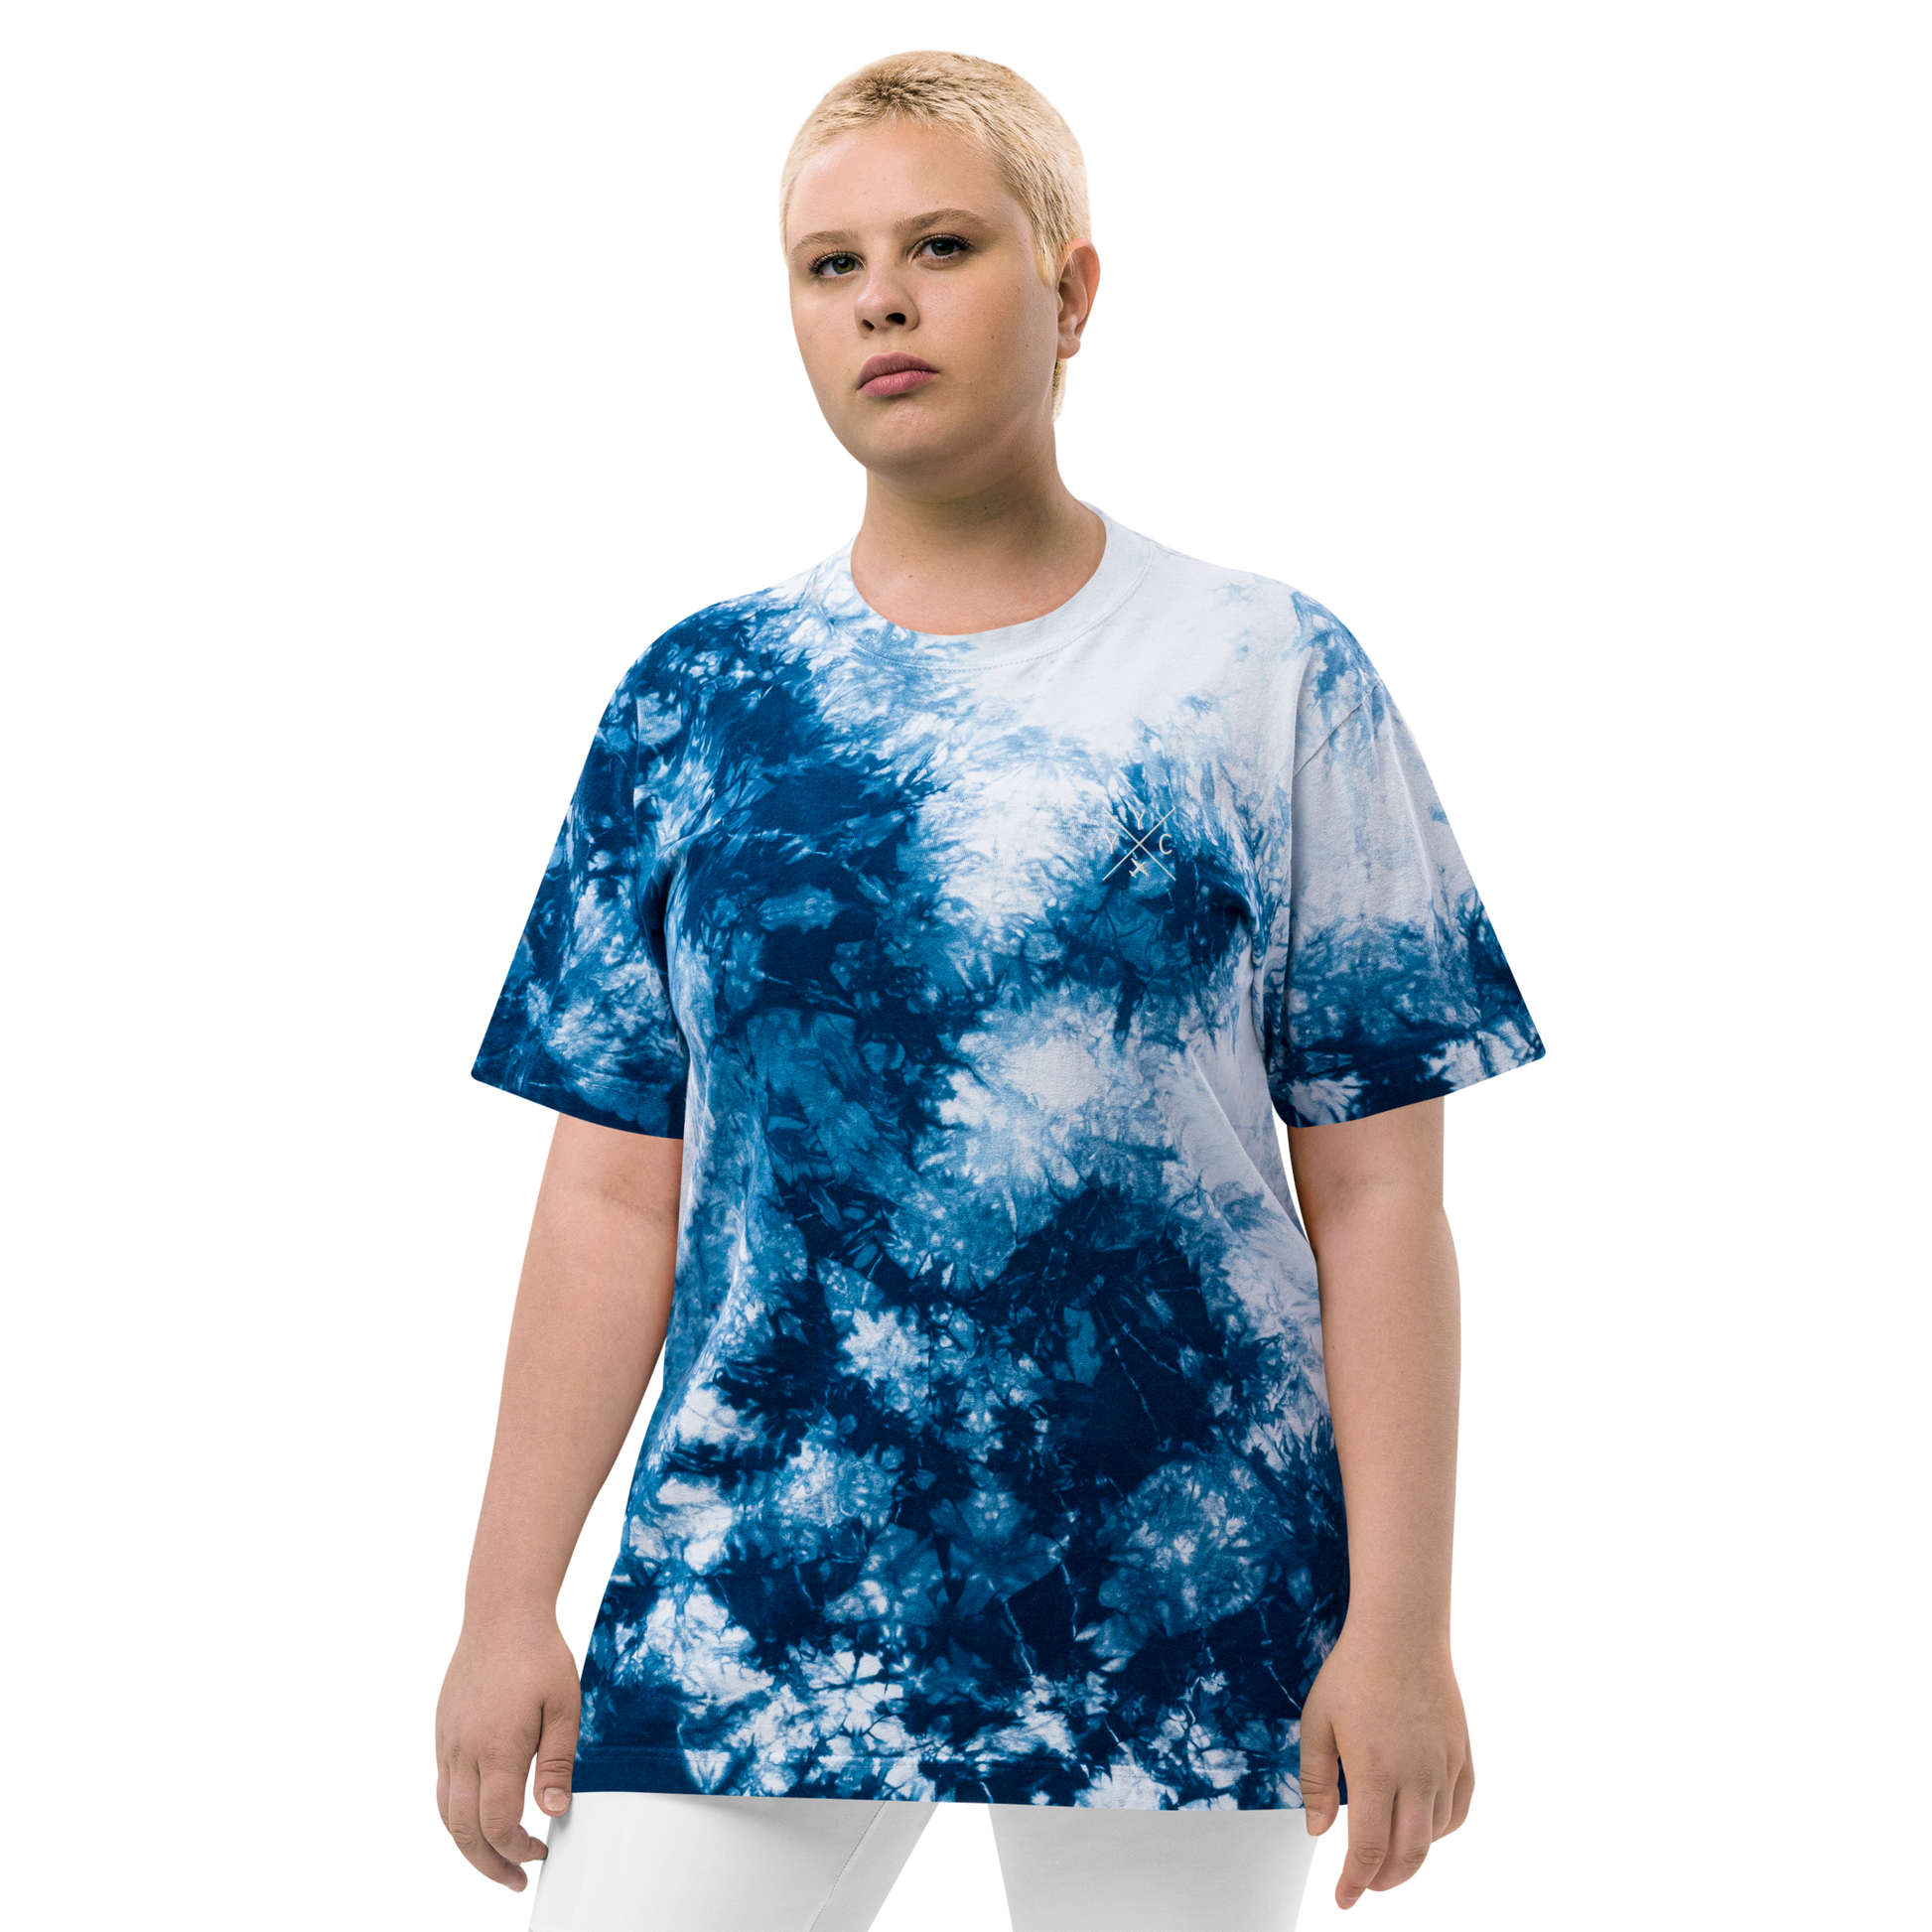 YHM Designs - YYC Calgary Oversized Tie-Dye T-Shirt - Crossed-X Design with Airport Code and Vintage Propliner - White Embroidery - Image 08